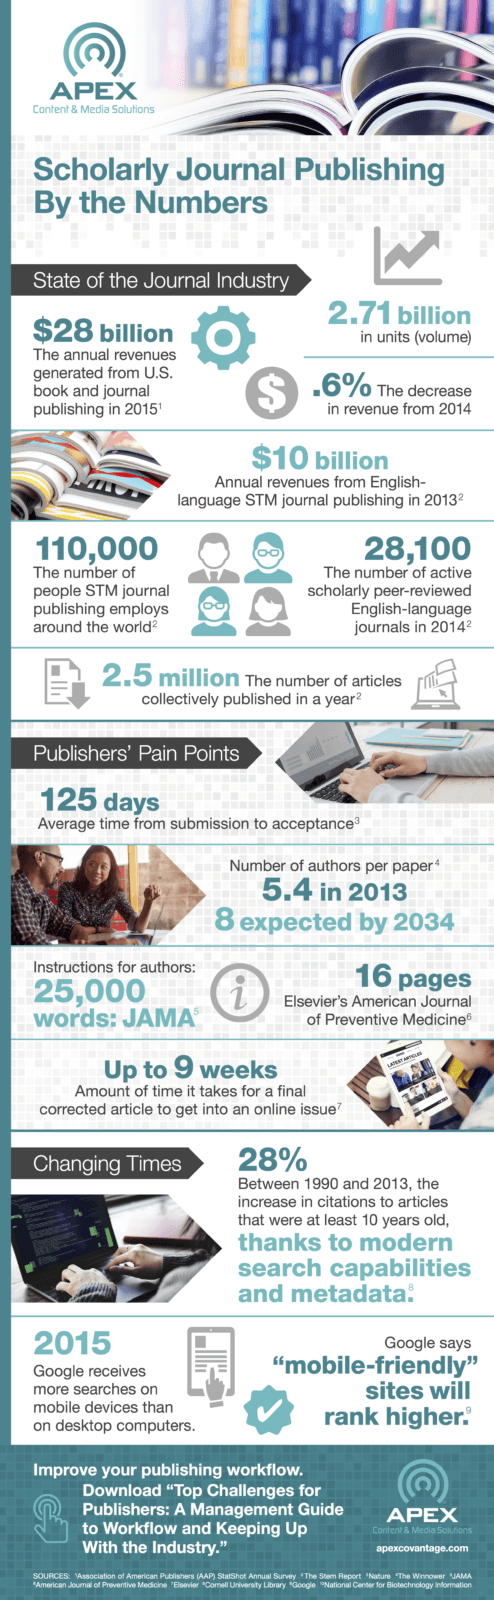 Scholarly Journal Publishing by the Numbers_Infographic